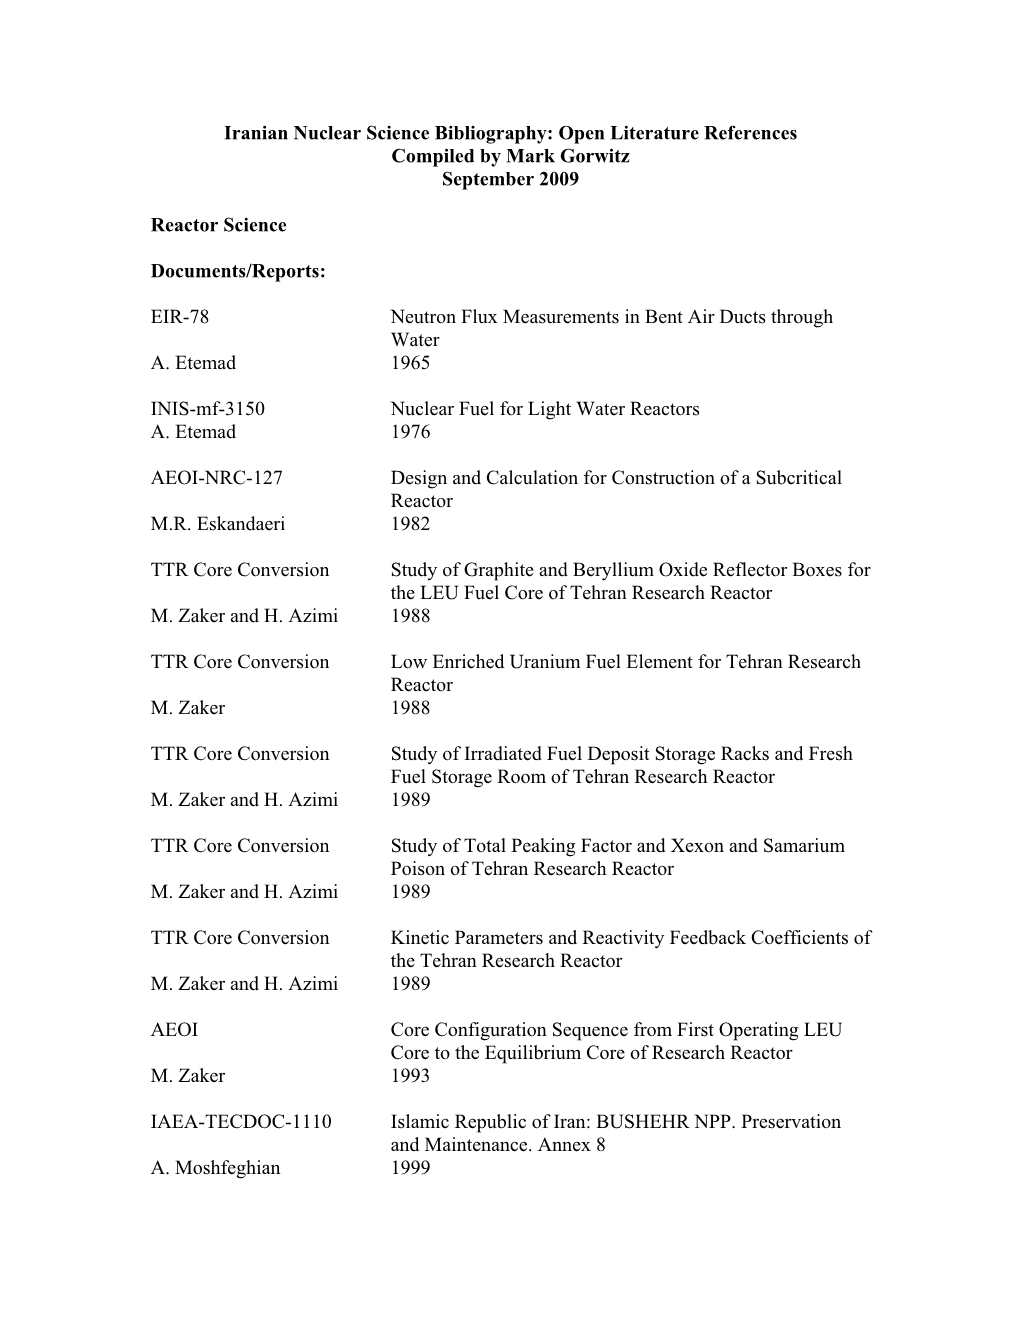 Iranian Nuclear Science Bibliography: Open Literature References Compiled by Mark Gorwitz September 2009